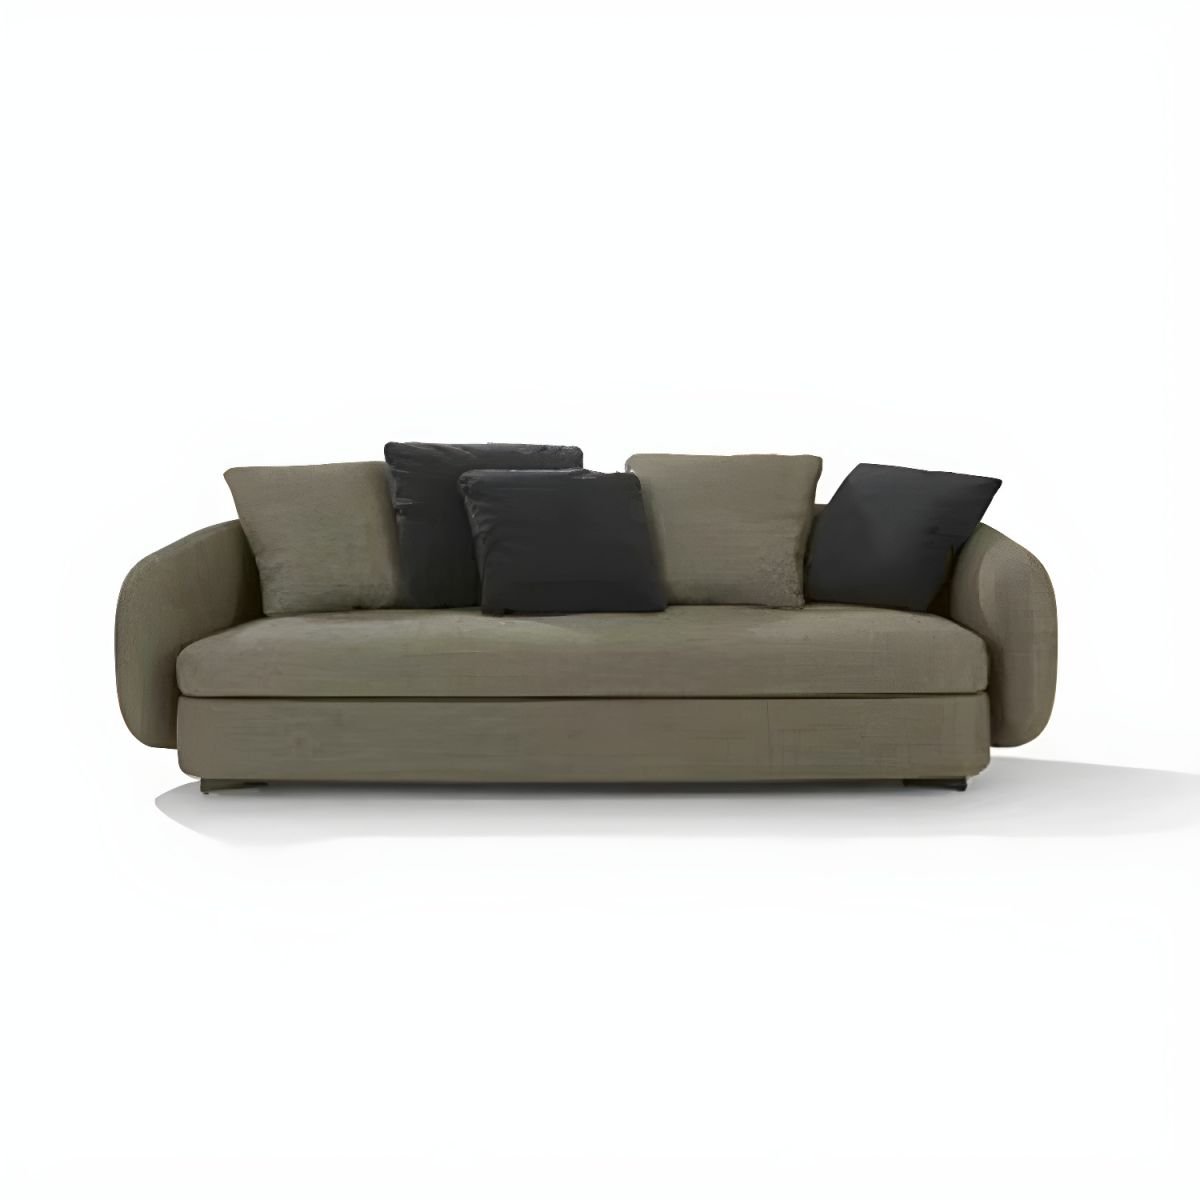 Contemporary Upholstered Modular Sofa and Standard Sofa for Living Room - 67"L x 39"W x 27.5"H Sherpa